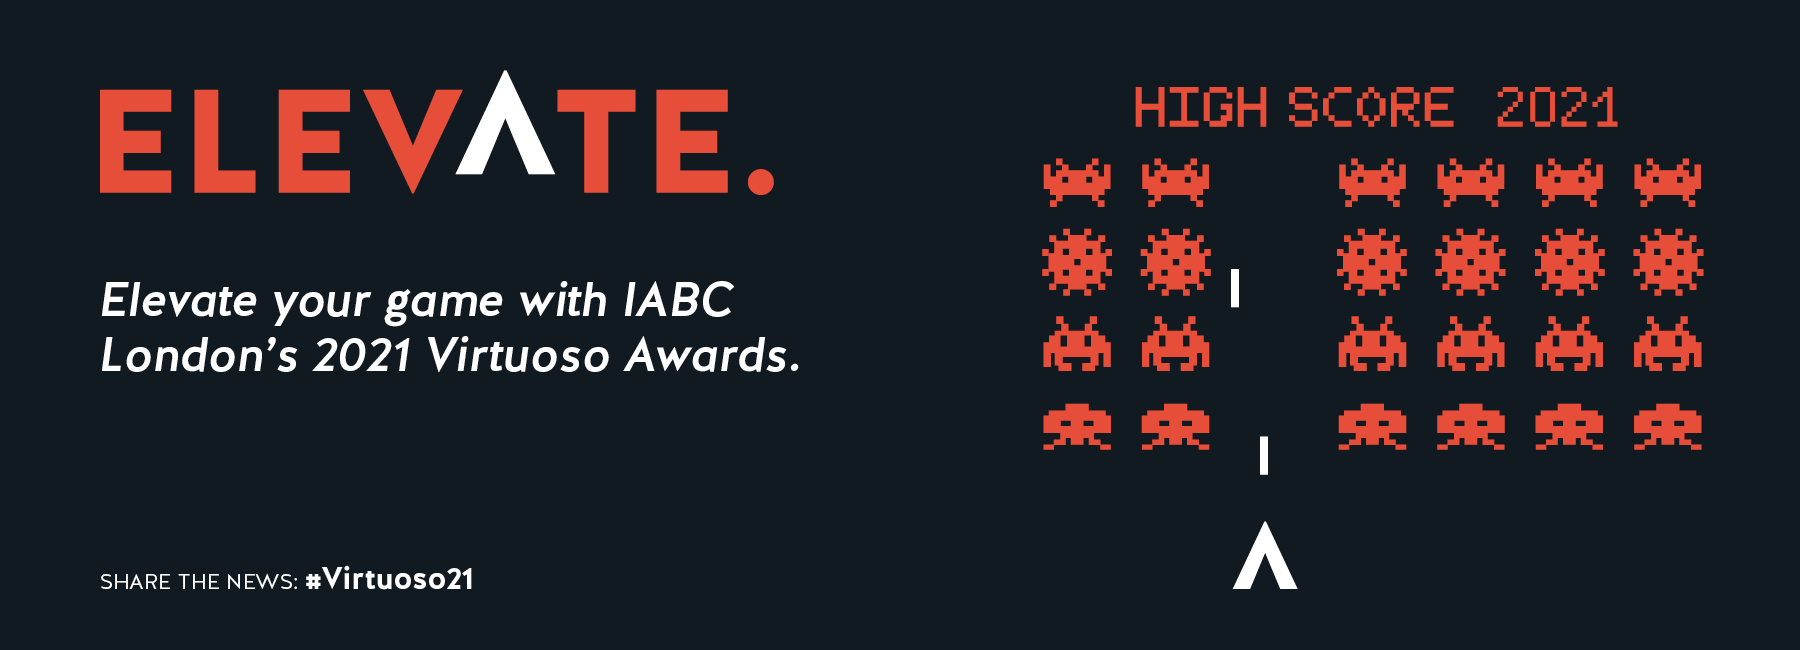 Elevate your game with IABC London's 2021 Virtuoso Awards.